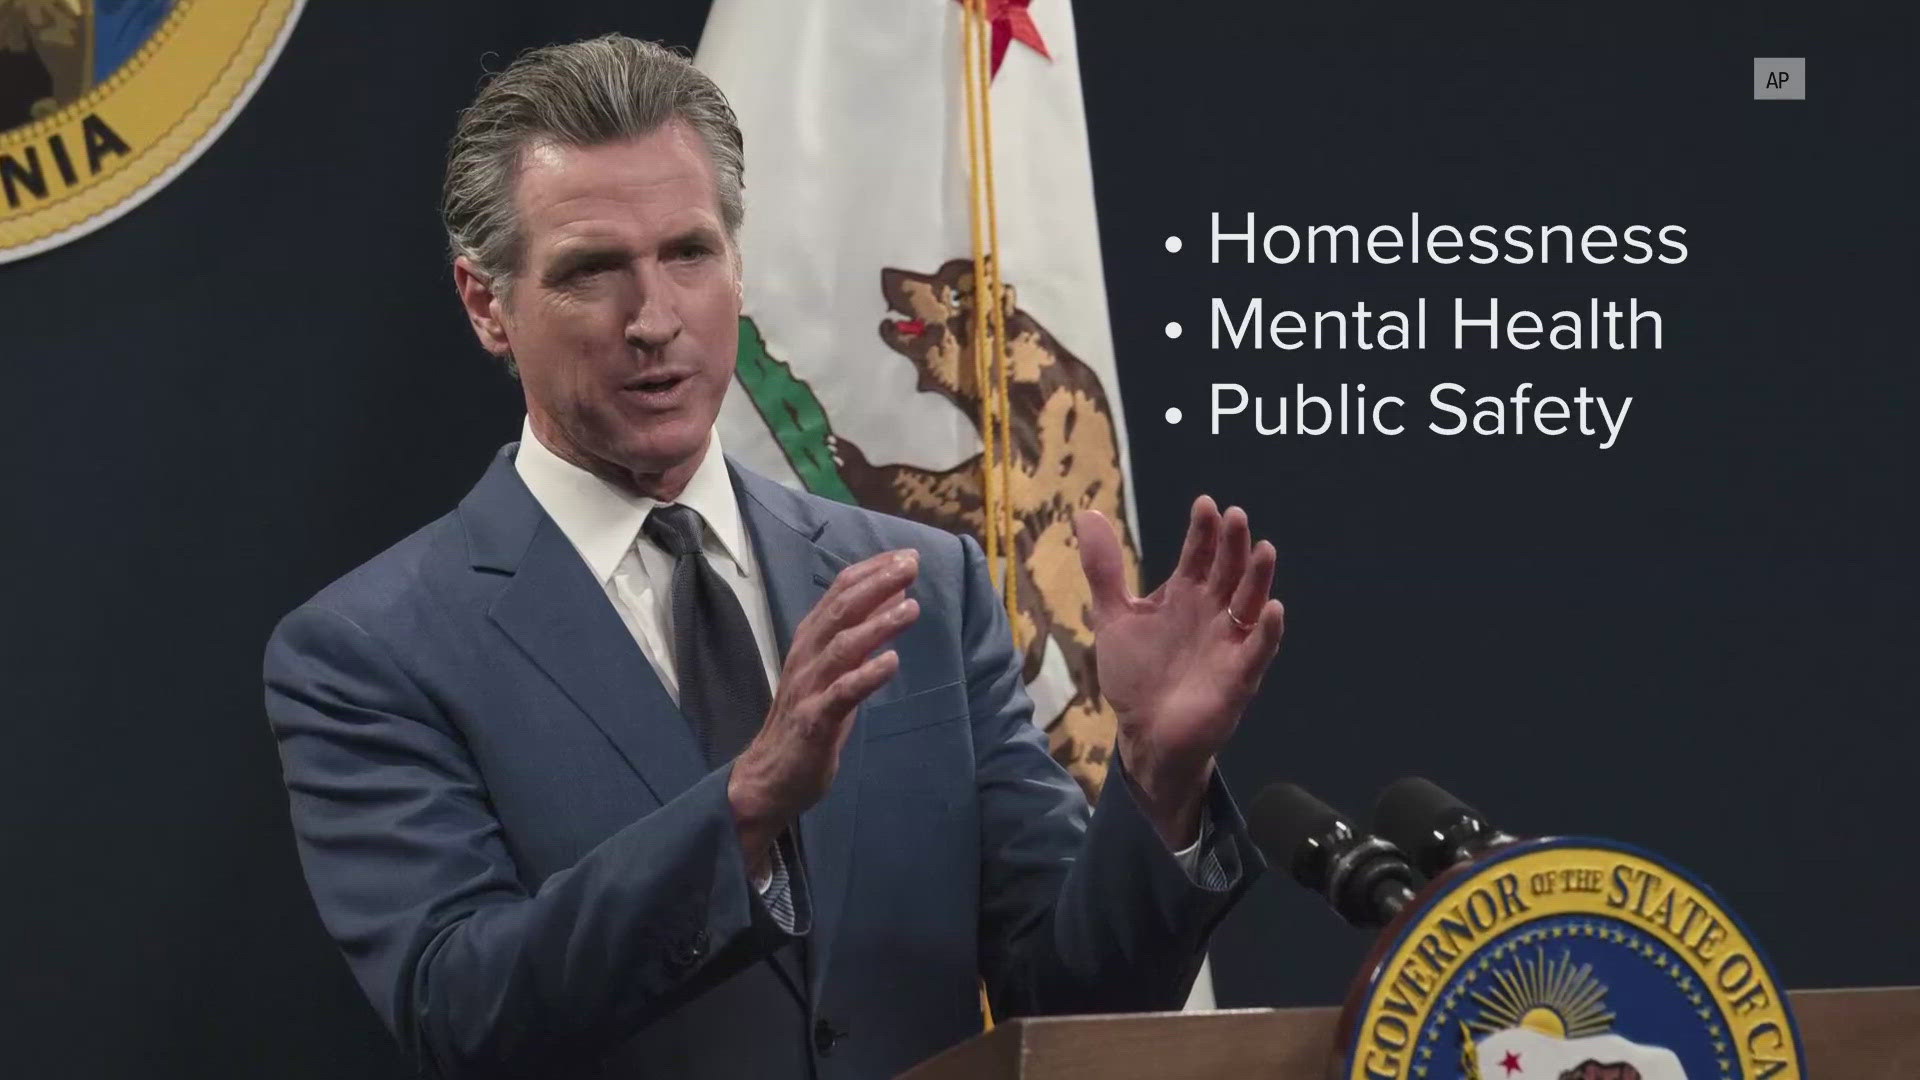 Gov. Gavin Newsom is expected to address topics of homelessness, mental health and public safety.